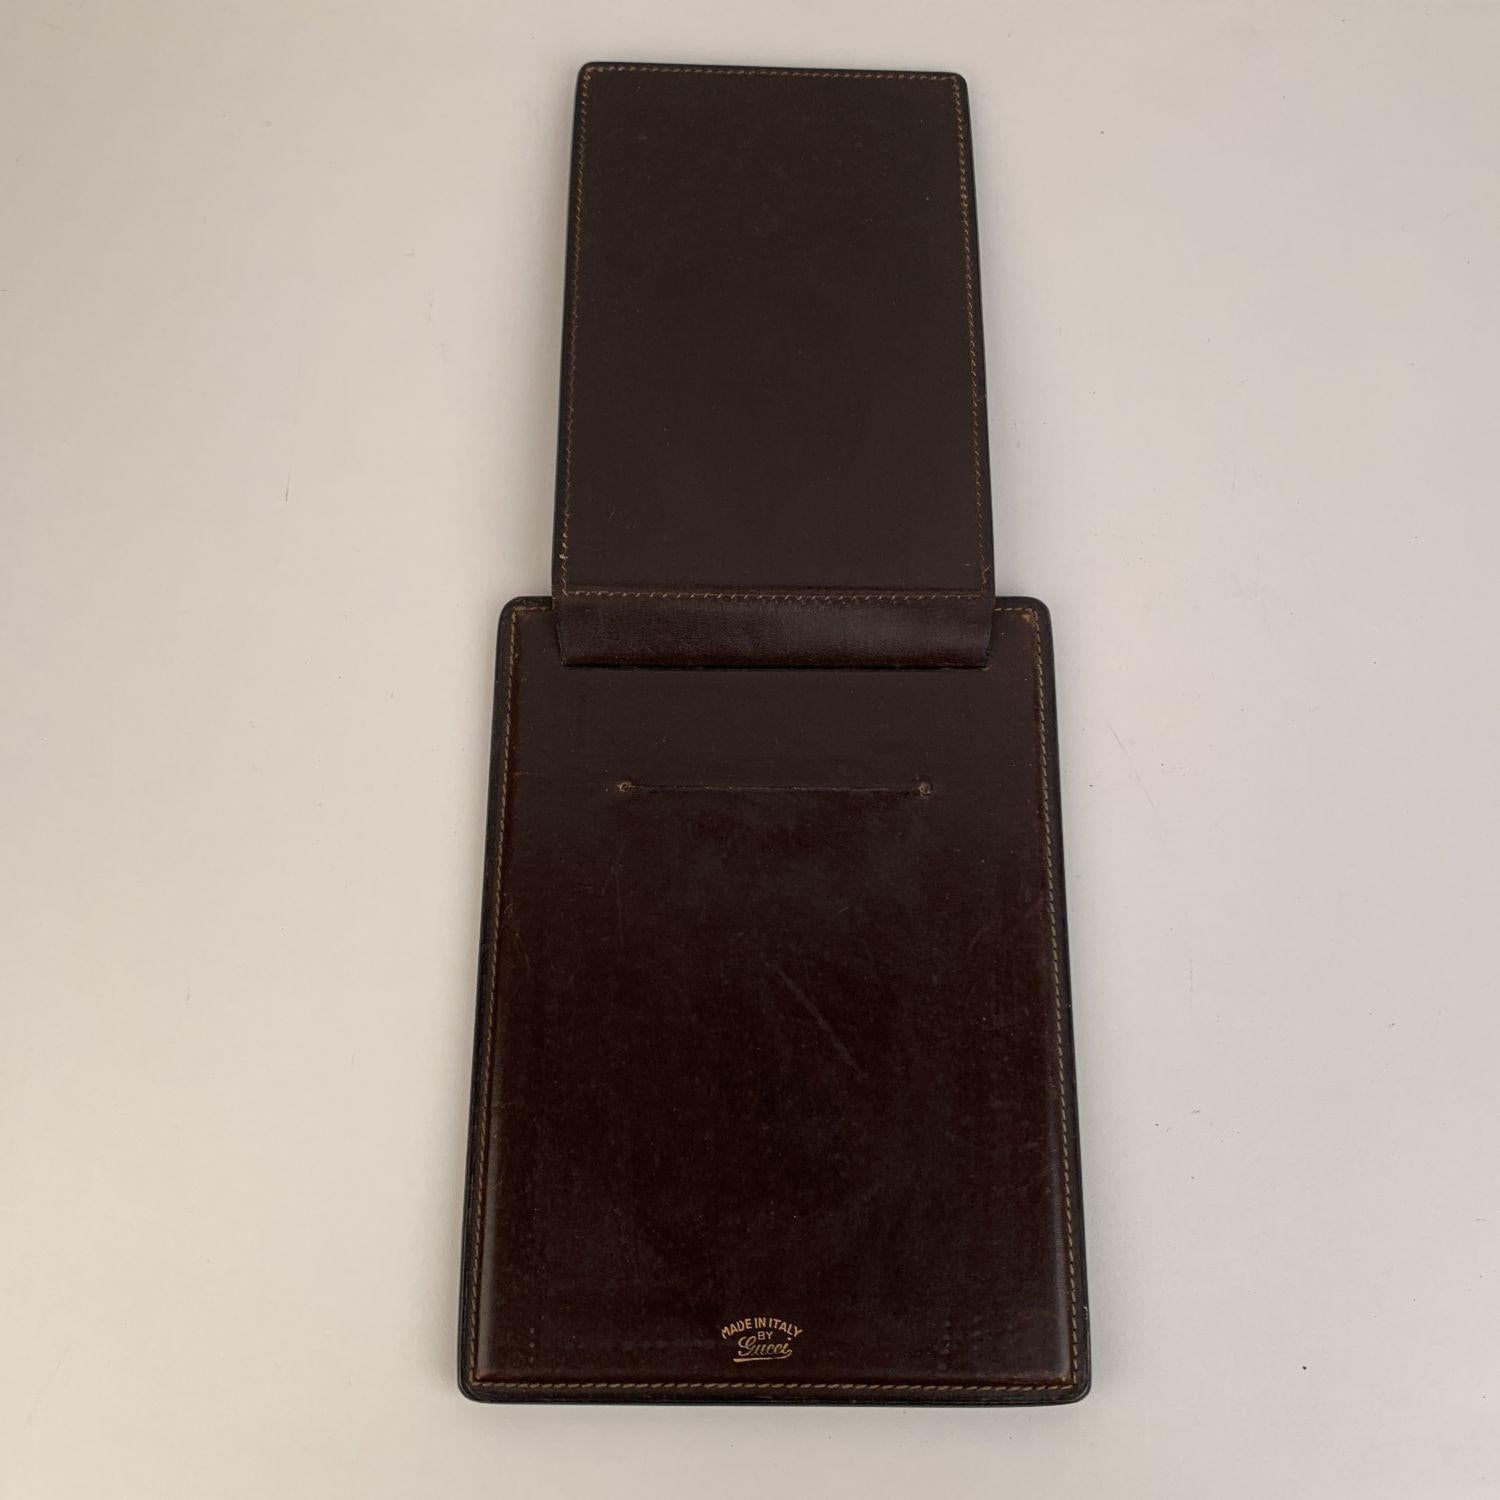 Gucci Vintage vertical desk notepad. Crafted in brown leather with gold metal knot detailing on top. Embossed 'Made in Italy by GUCCI' internally. 1 slot for notebook internally. Measurements: 9 x 6.5 inches - 22.8 x 16.5 cm


Details

MATERIAL: